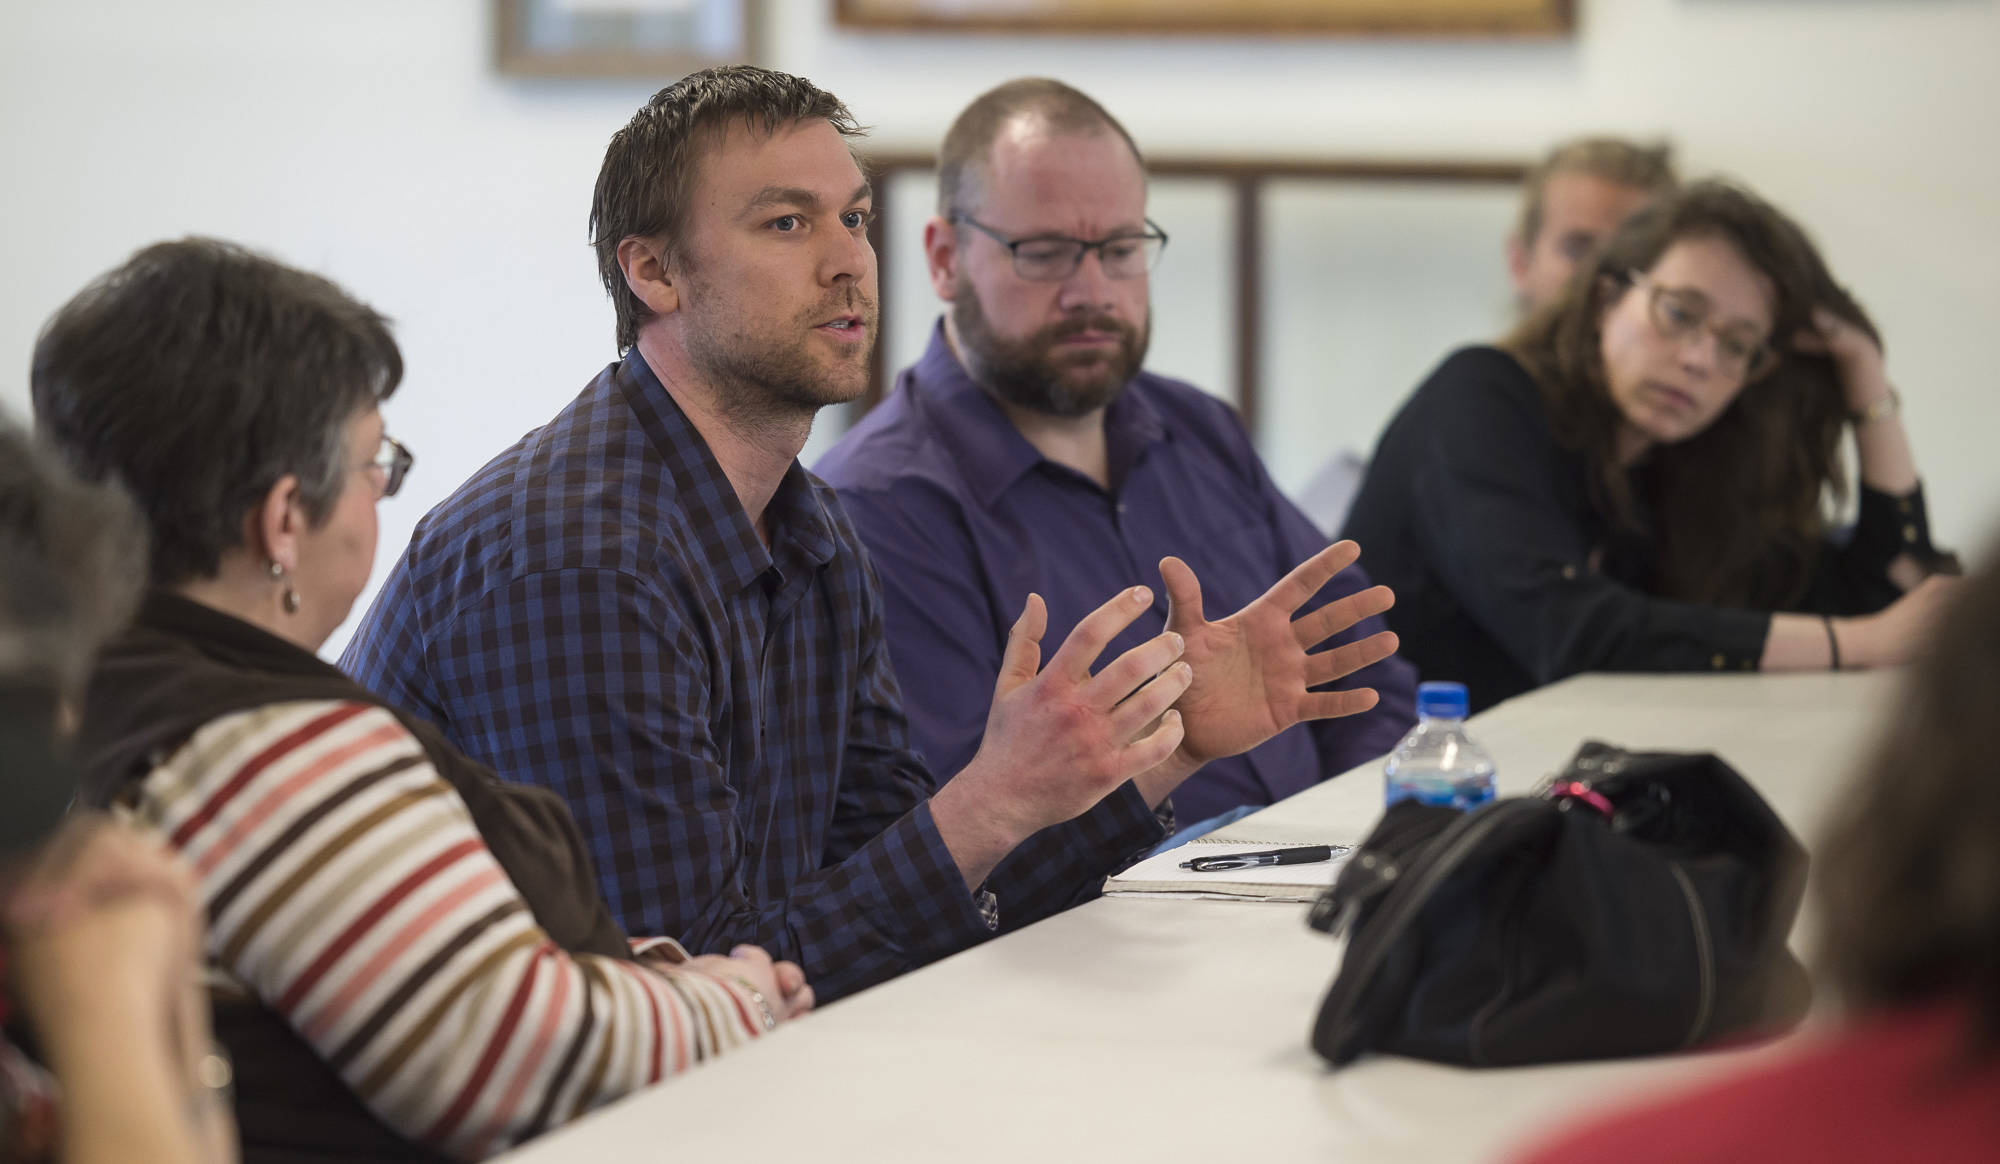 Aaron Surma, a consultant for Juneau Alliance for Mental Health, Inc. (JAMHI), speaks during a meeting of the Juneau Coalition on Housing and Homelessness at Gruening Park on Thursday, April 26, 2018. (Michael Penn | Juneau Empire)